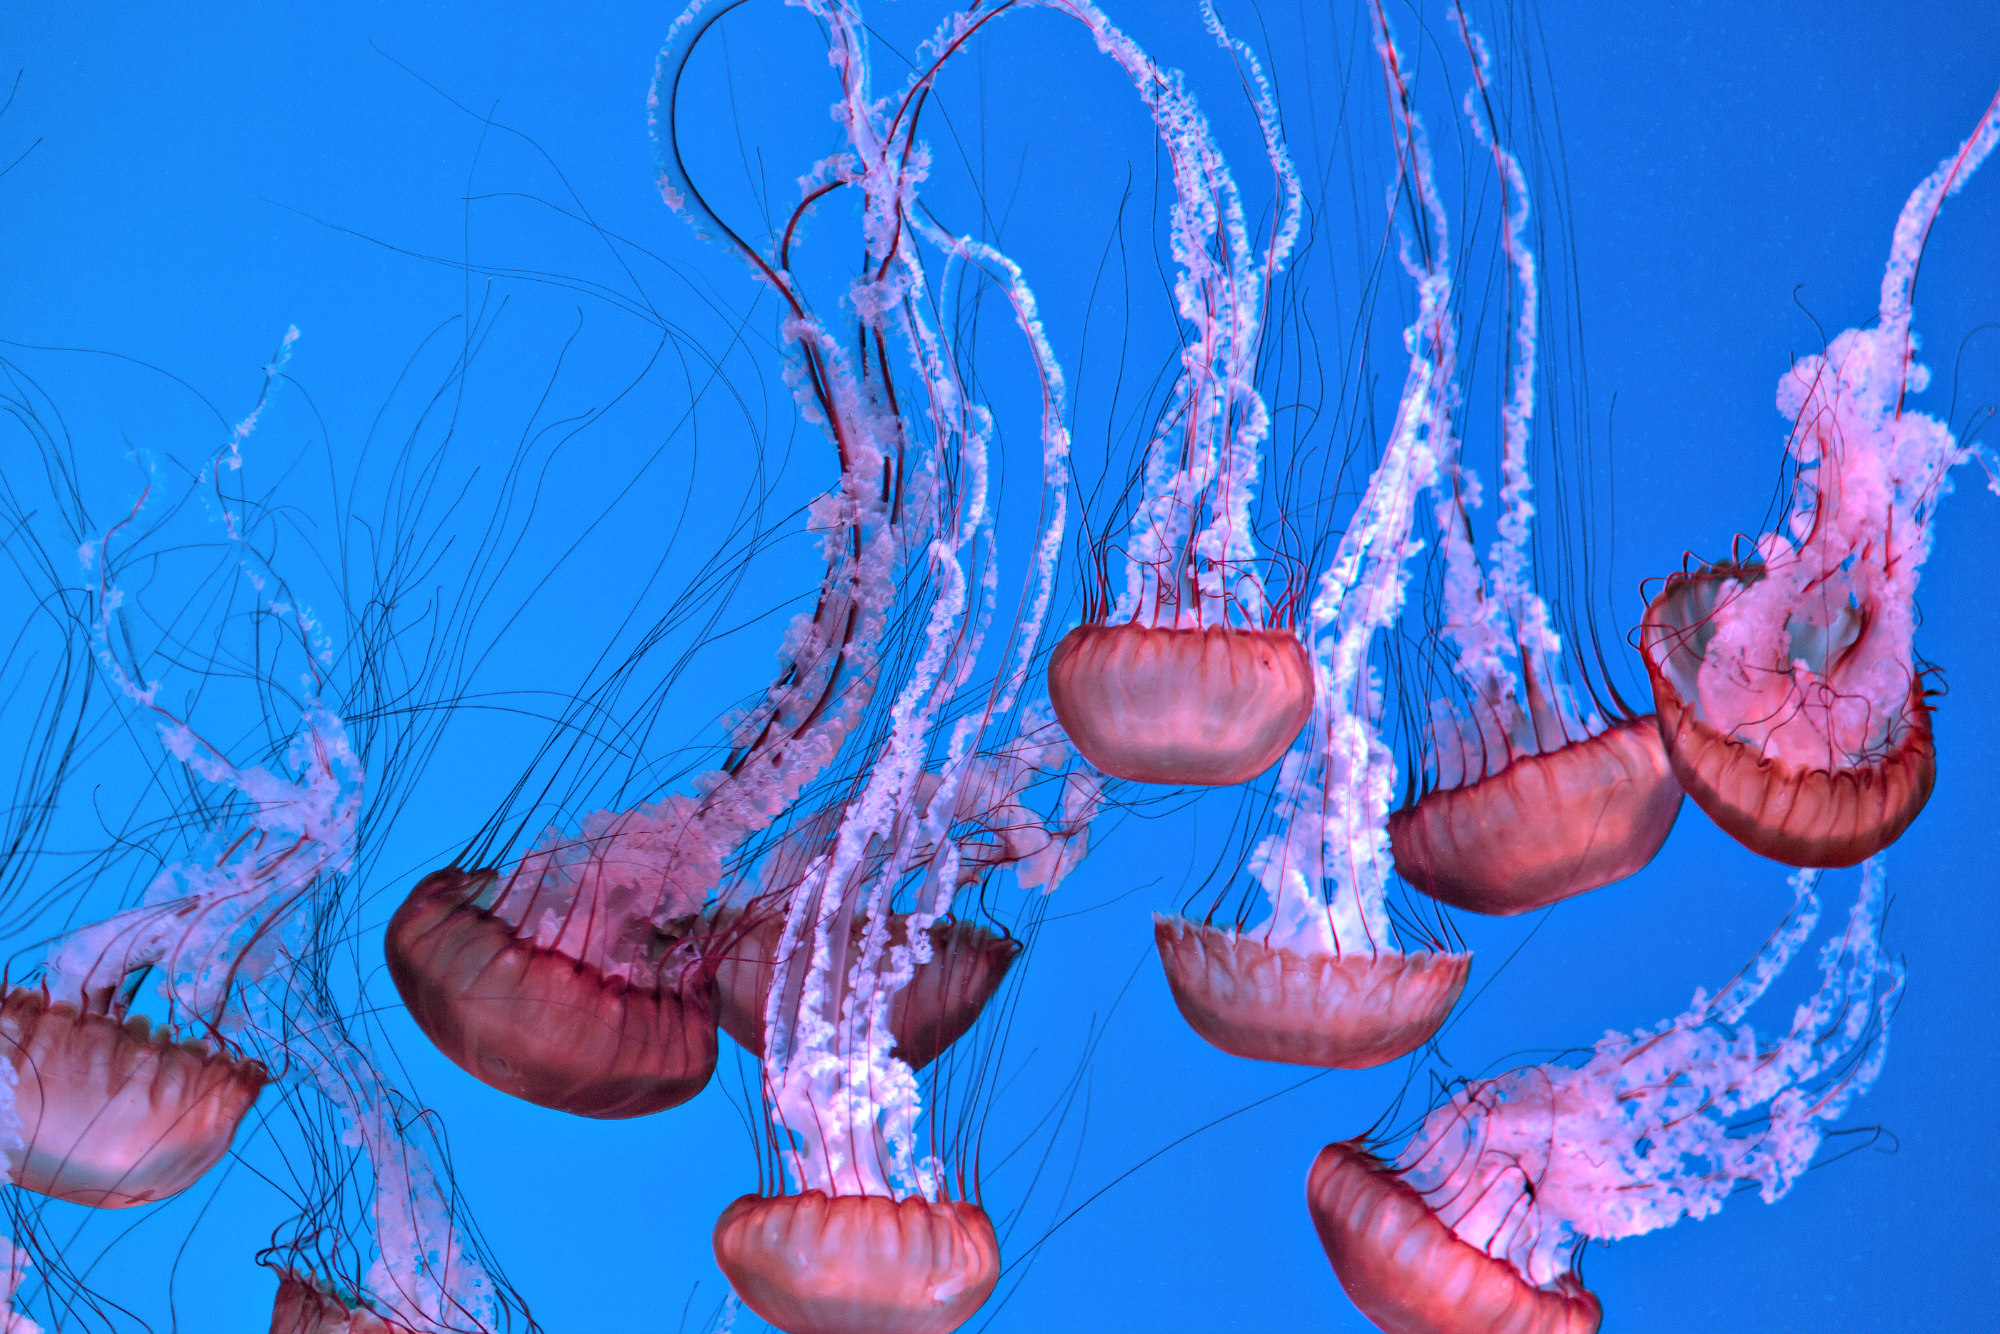 Shaded in hues ranging from hot pink to white, colorful jellyfish swim upside down in an aquarium.